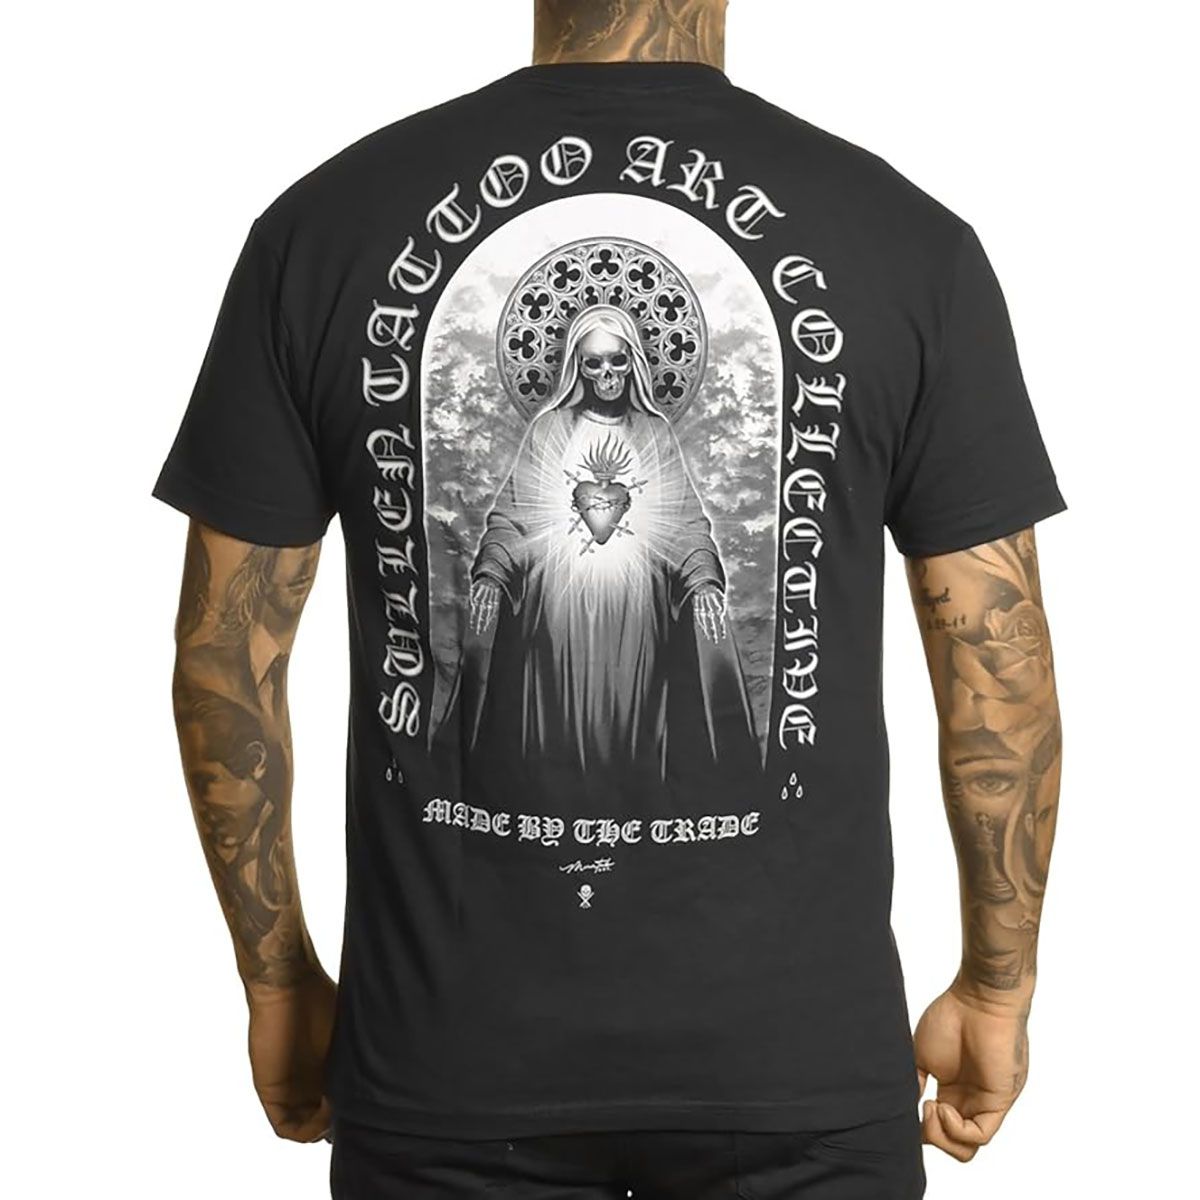 SULLEN ART COLLECTIVE MARIA MUERTE - T-SHIRT - Synik Clothing - synikclothing.com